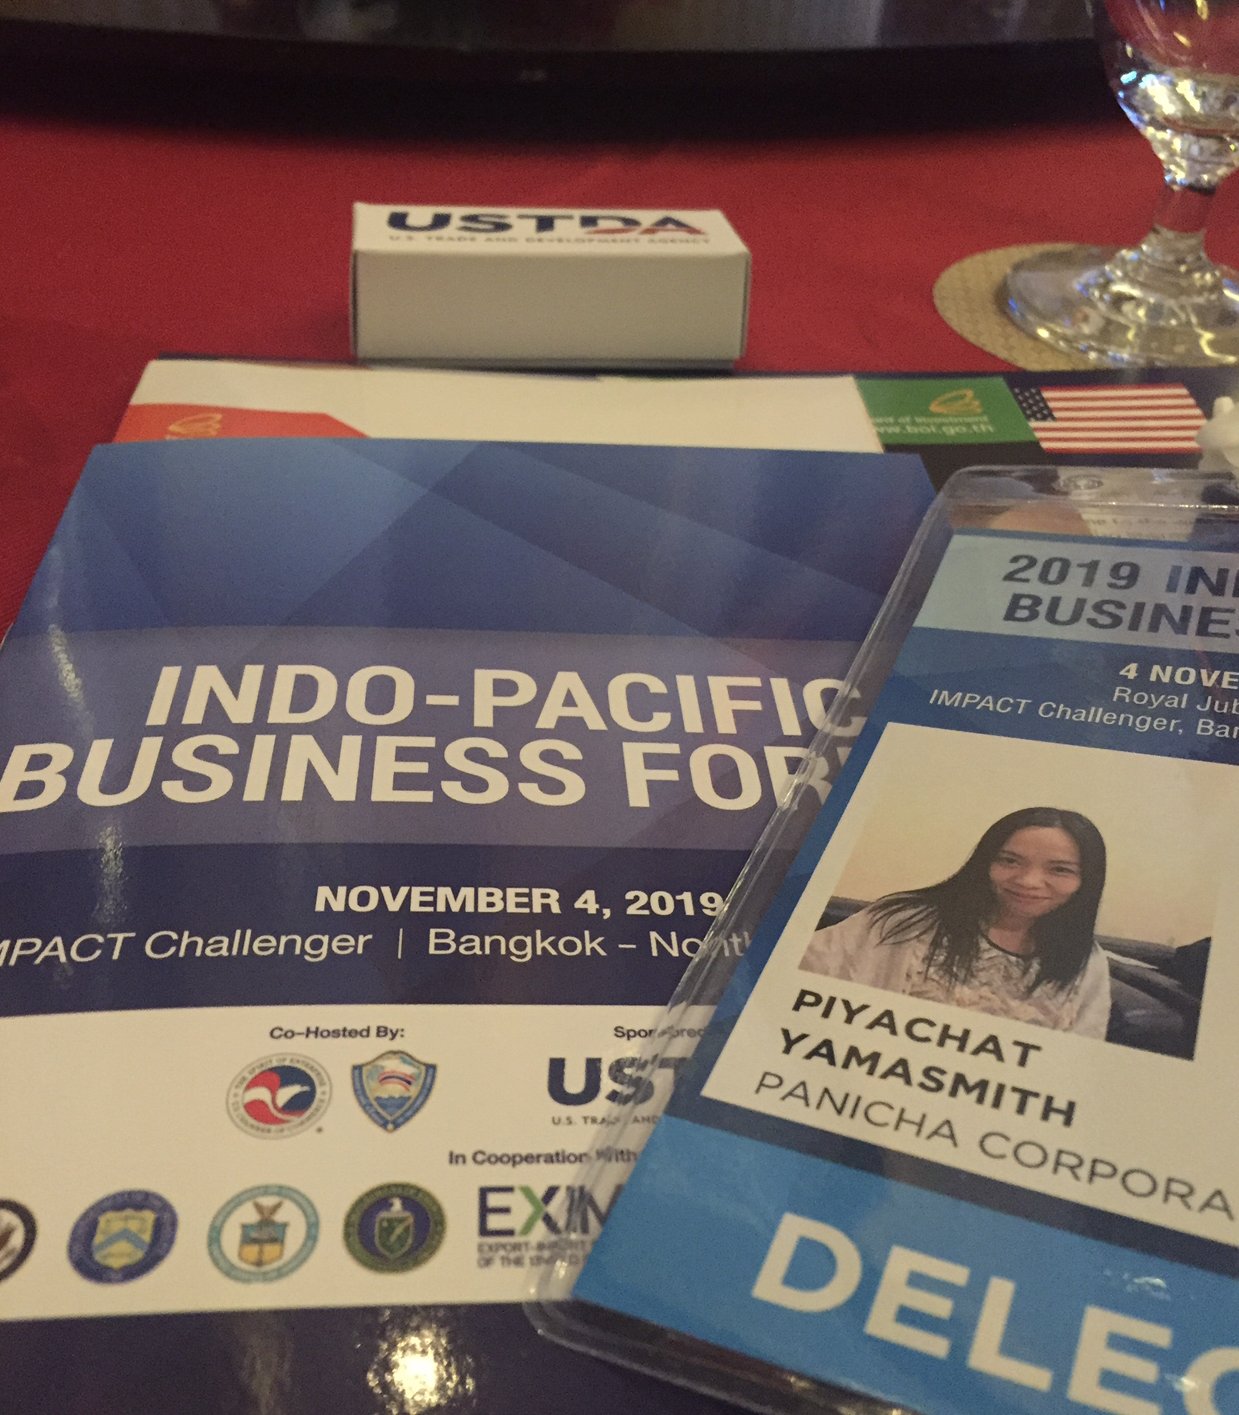 INDO-PACiFIC BUSINESS FORUM 